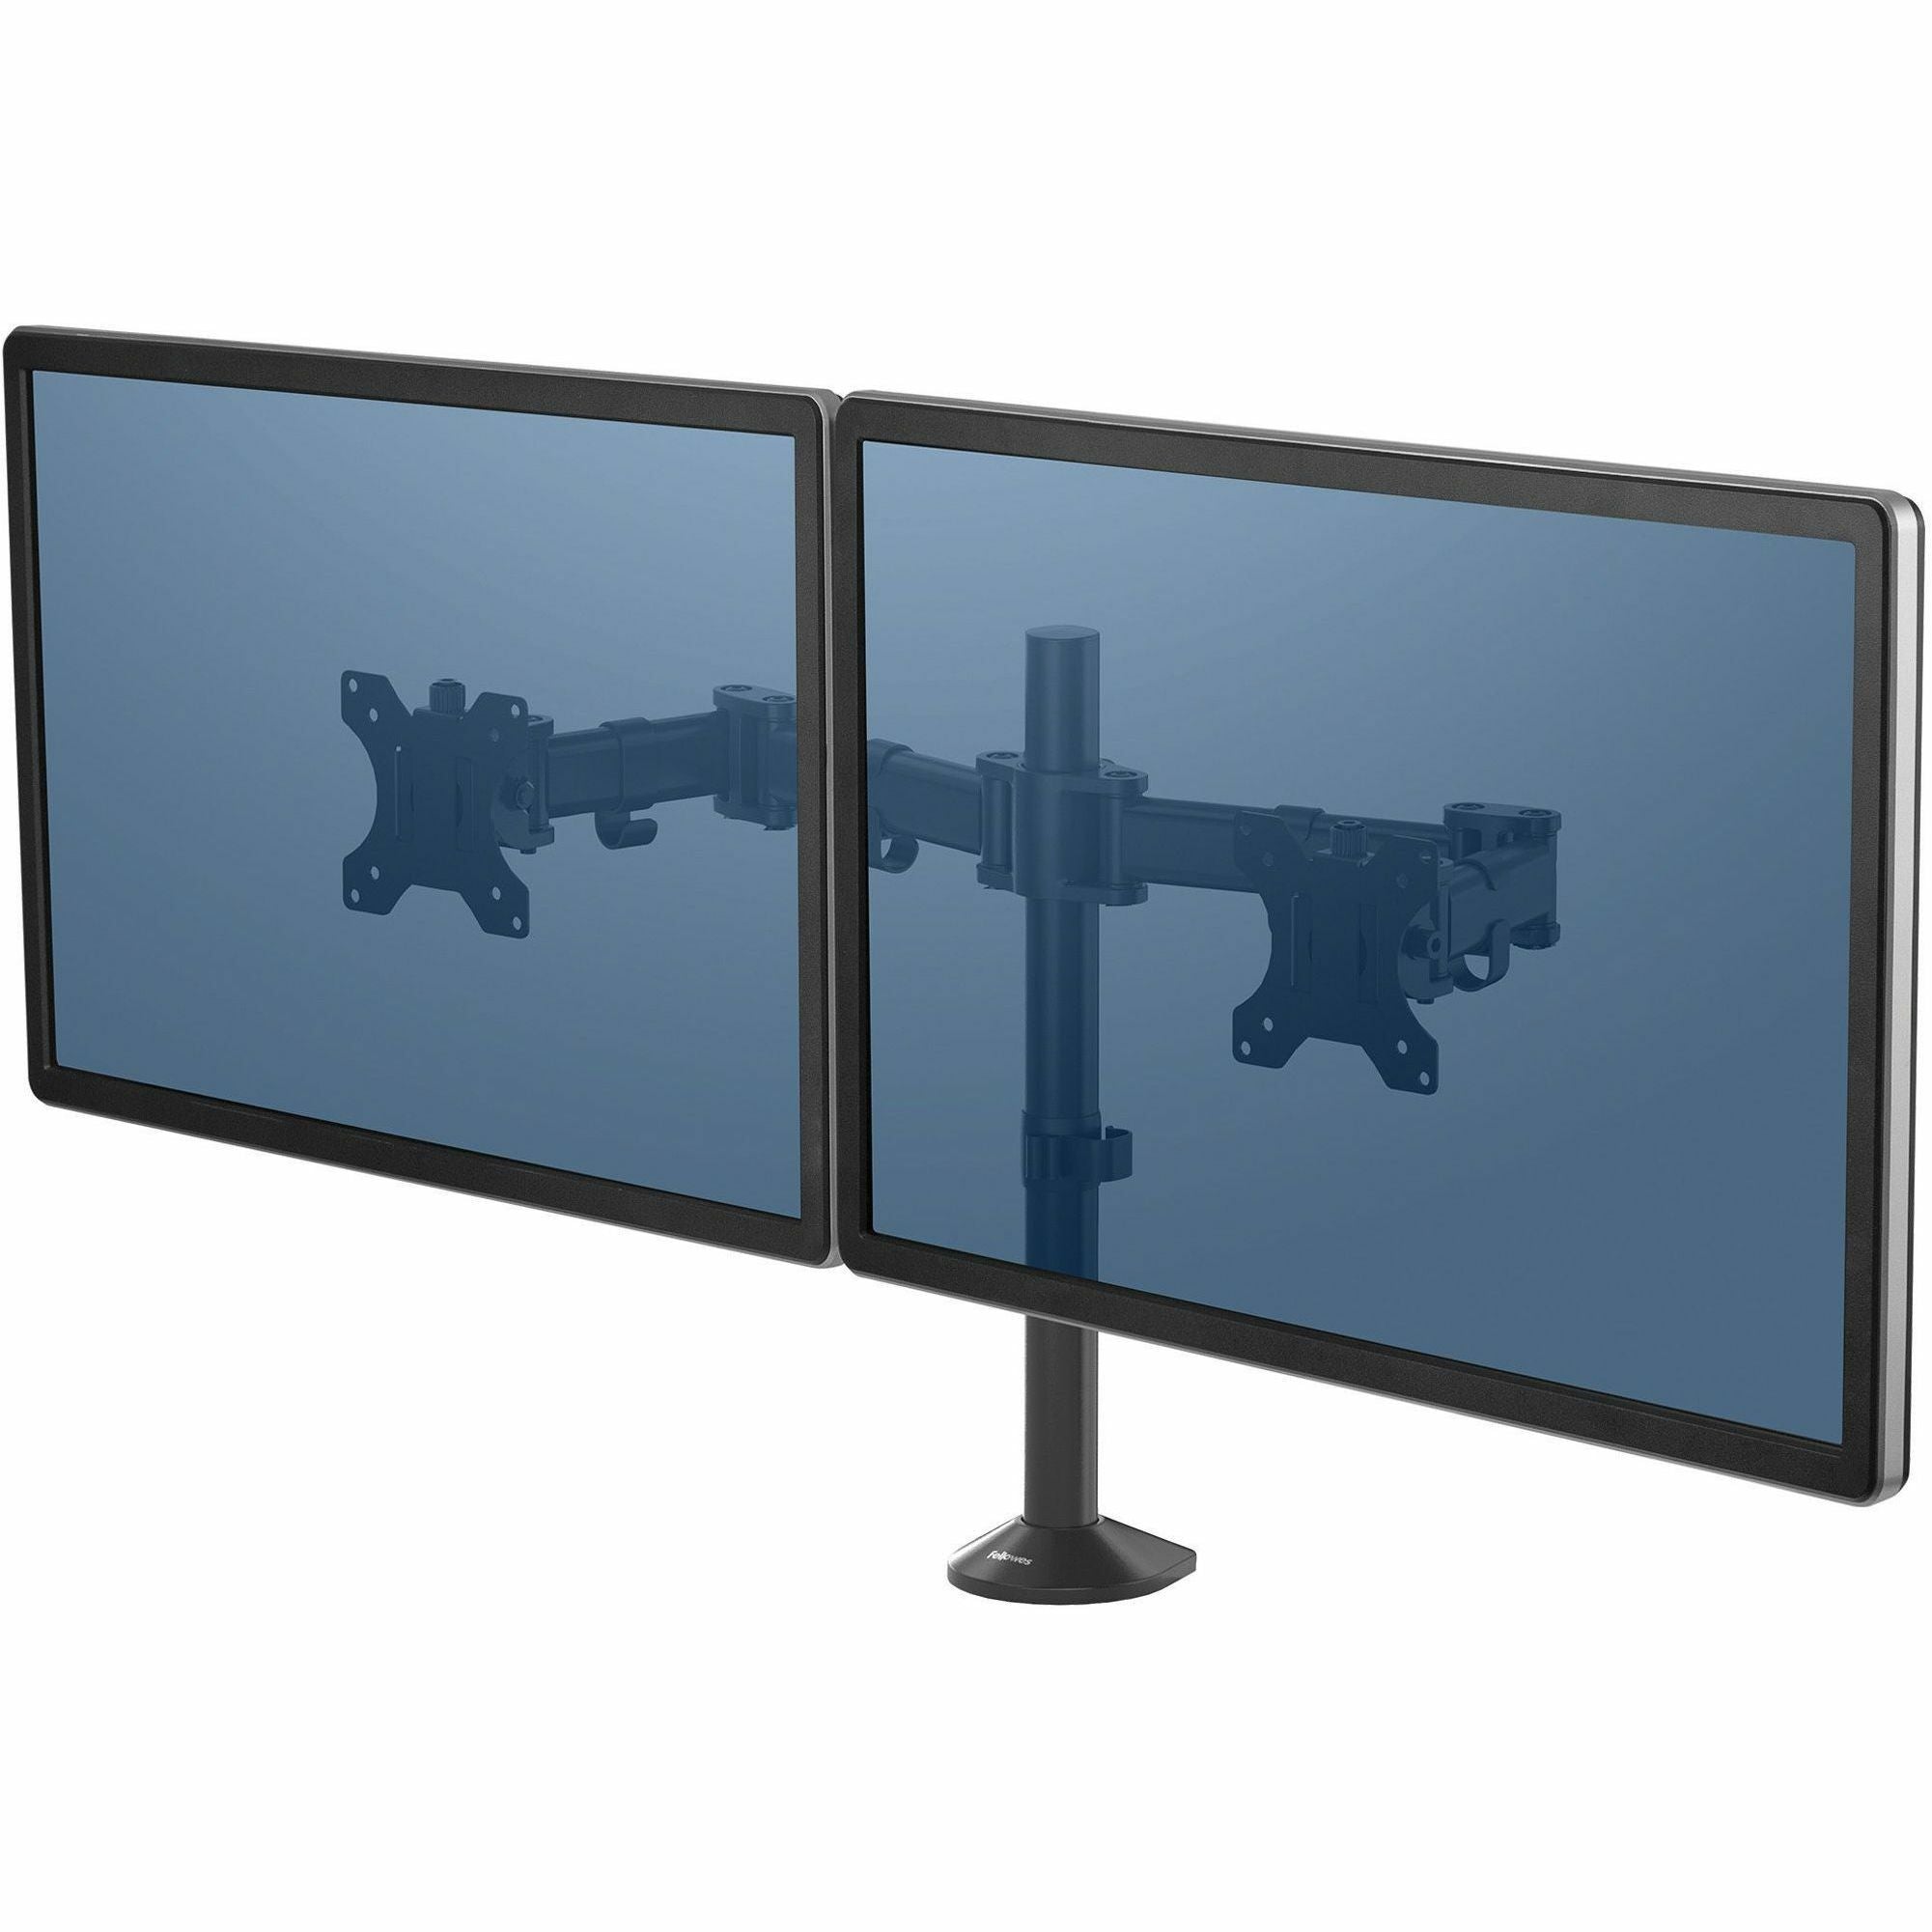 fellowes-reflex-dual-monitor-arm-2-displays-supported-30-screen-support-48-lb-load-capacity_fel8502601 - 3